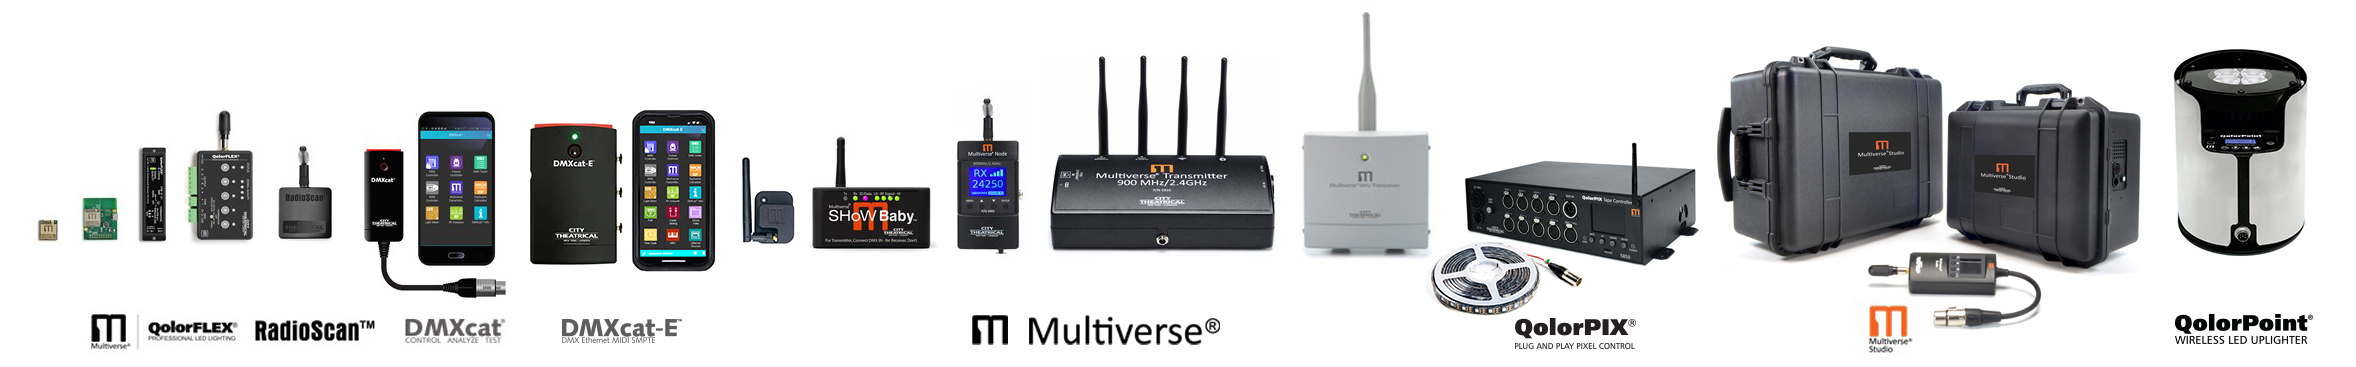 Multiverse wireless DMX/RDM solutions as a group, shown horizontal for USA